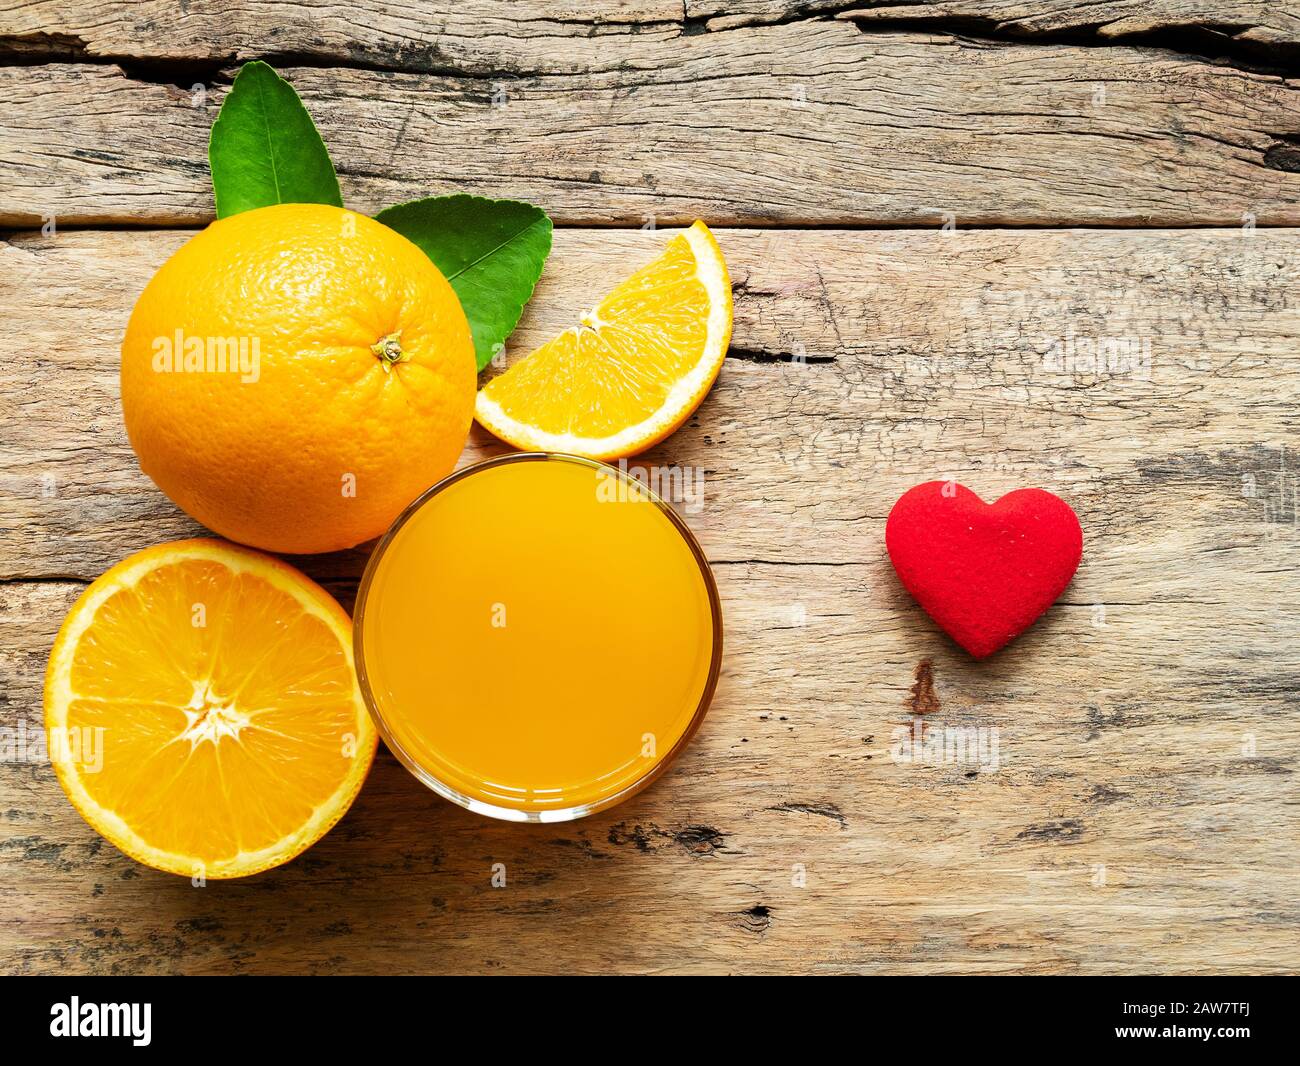 a glass of fresh orange juice and group of fresh orange fruits with green leaves, on wooden background with red heart shape. vitamin C and fruit produ Stock Photo